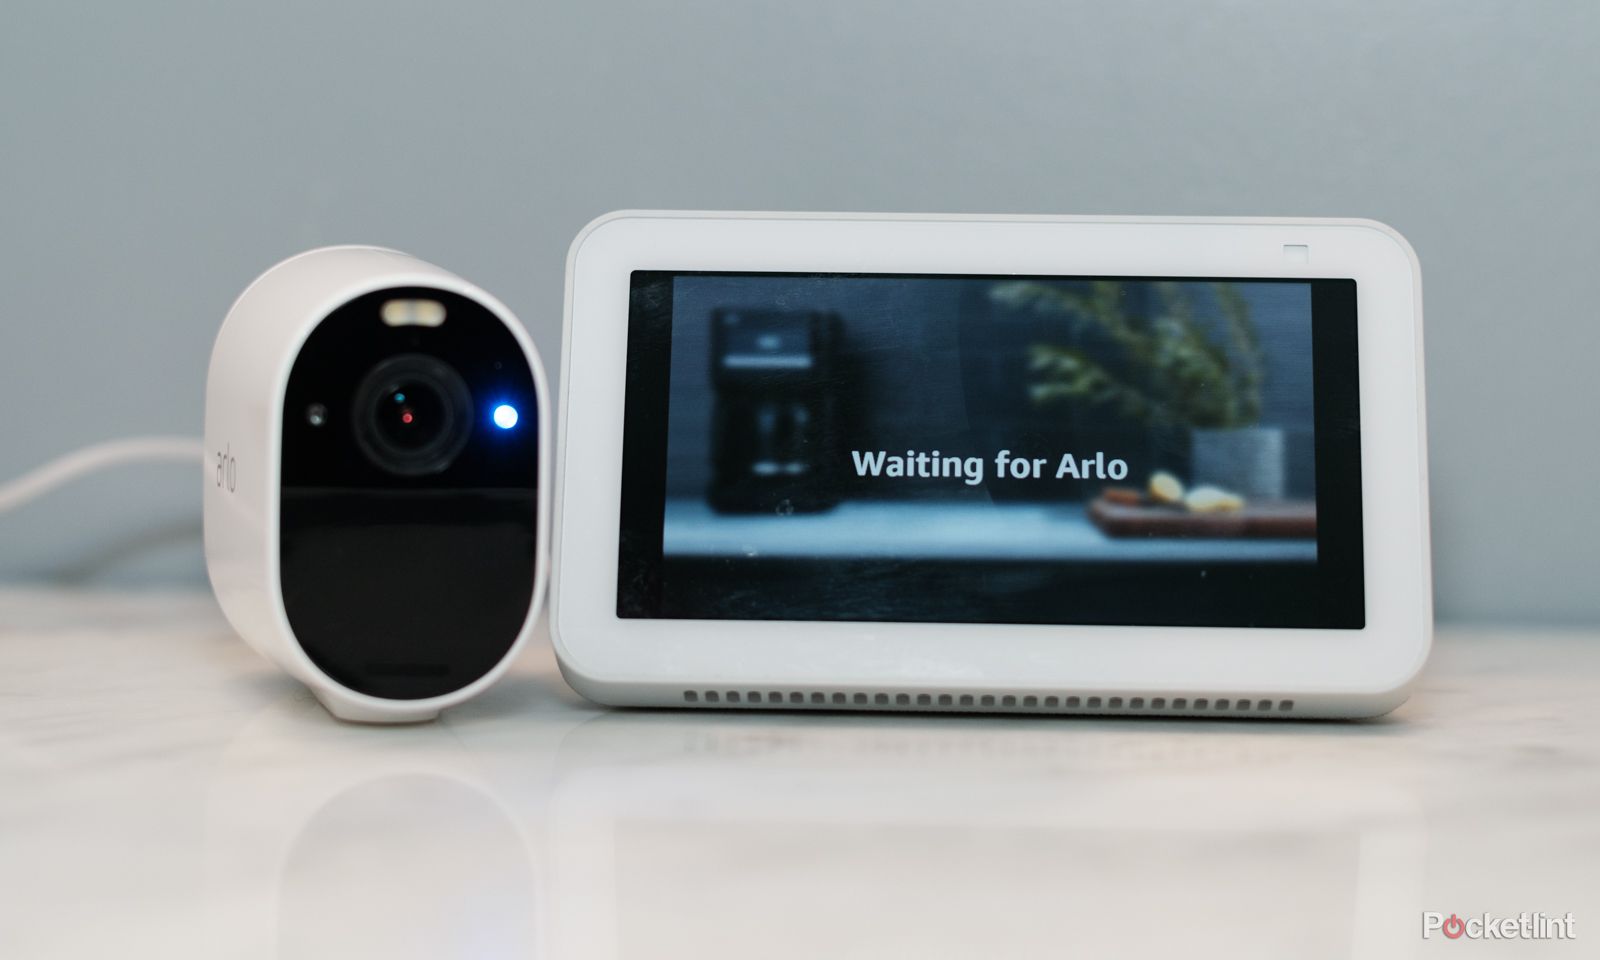 how-to-connect-arlo-to-alexa-hillary-grigonis-pocket-lint-9955